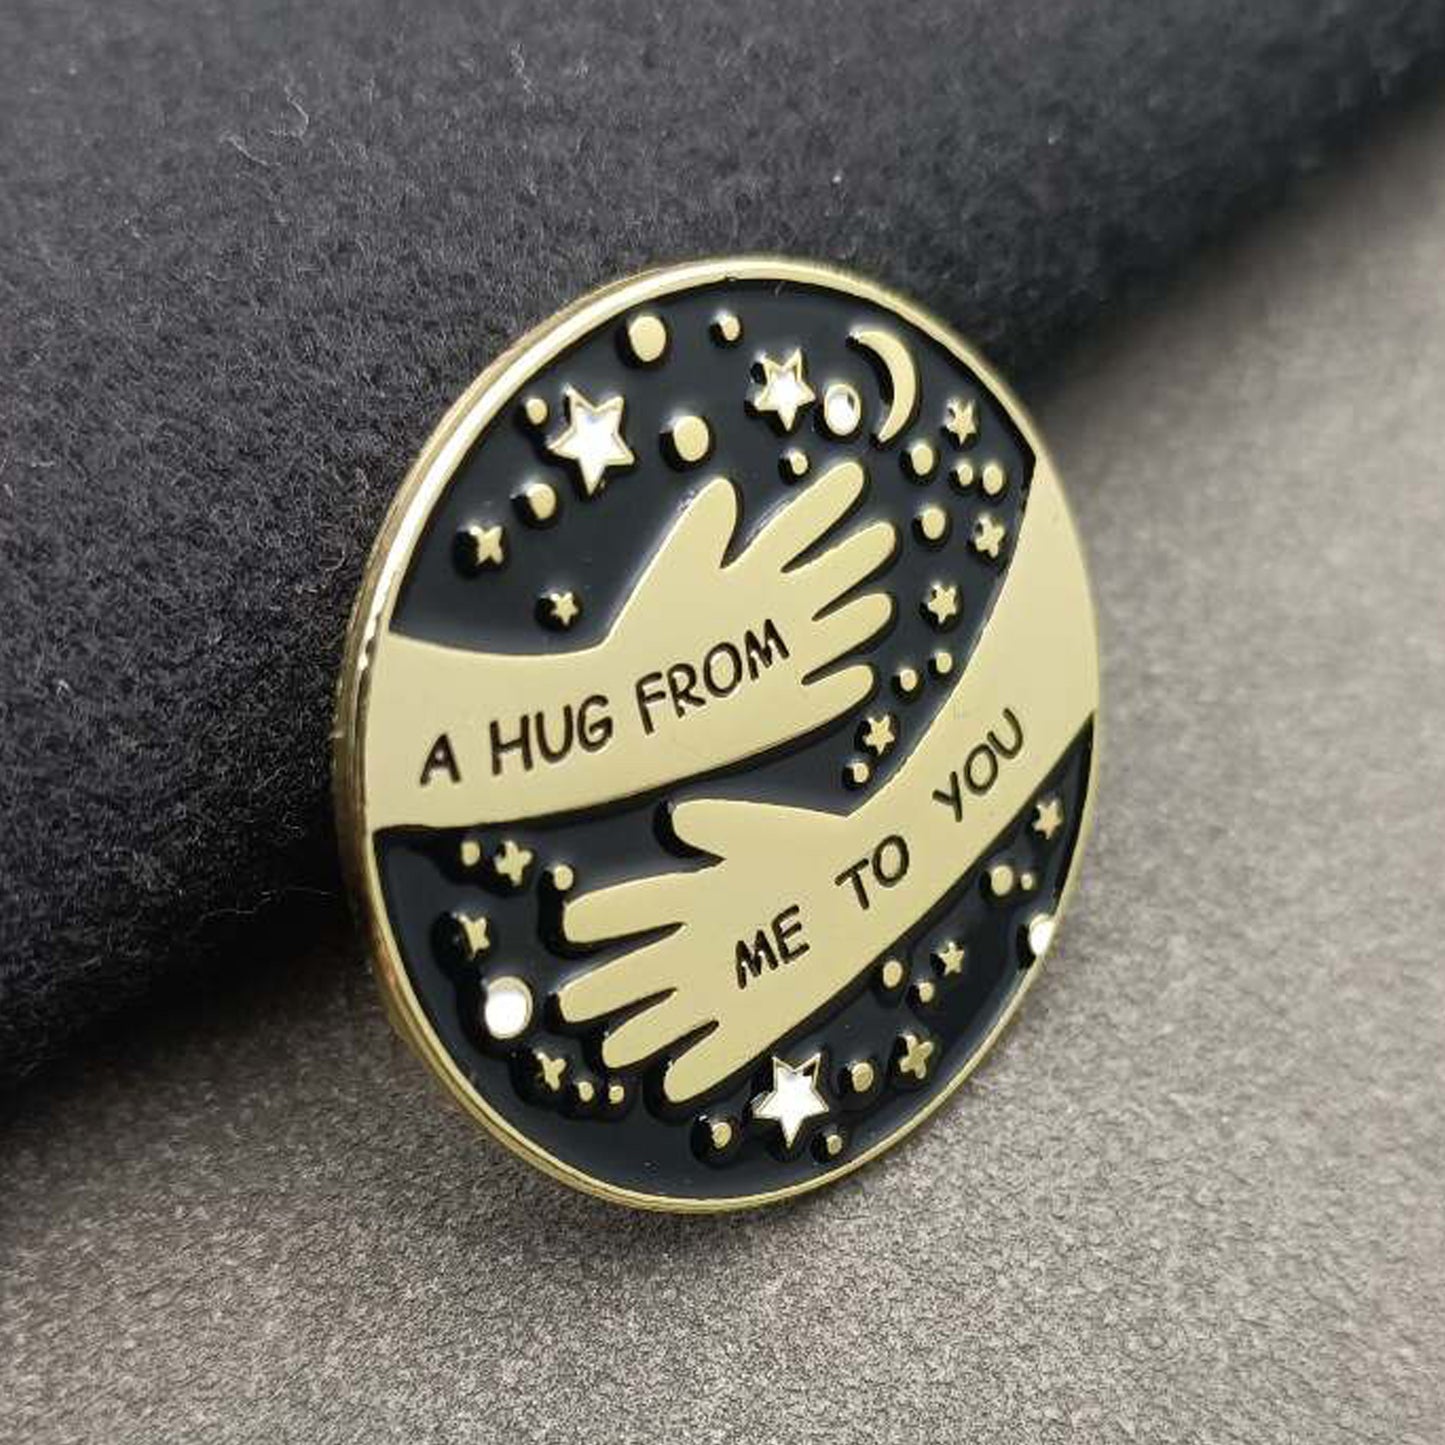 Thinking of You Pocket Hug Pin Badges and Personalised Message Cards